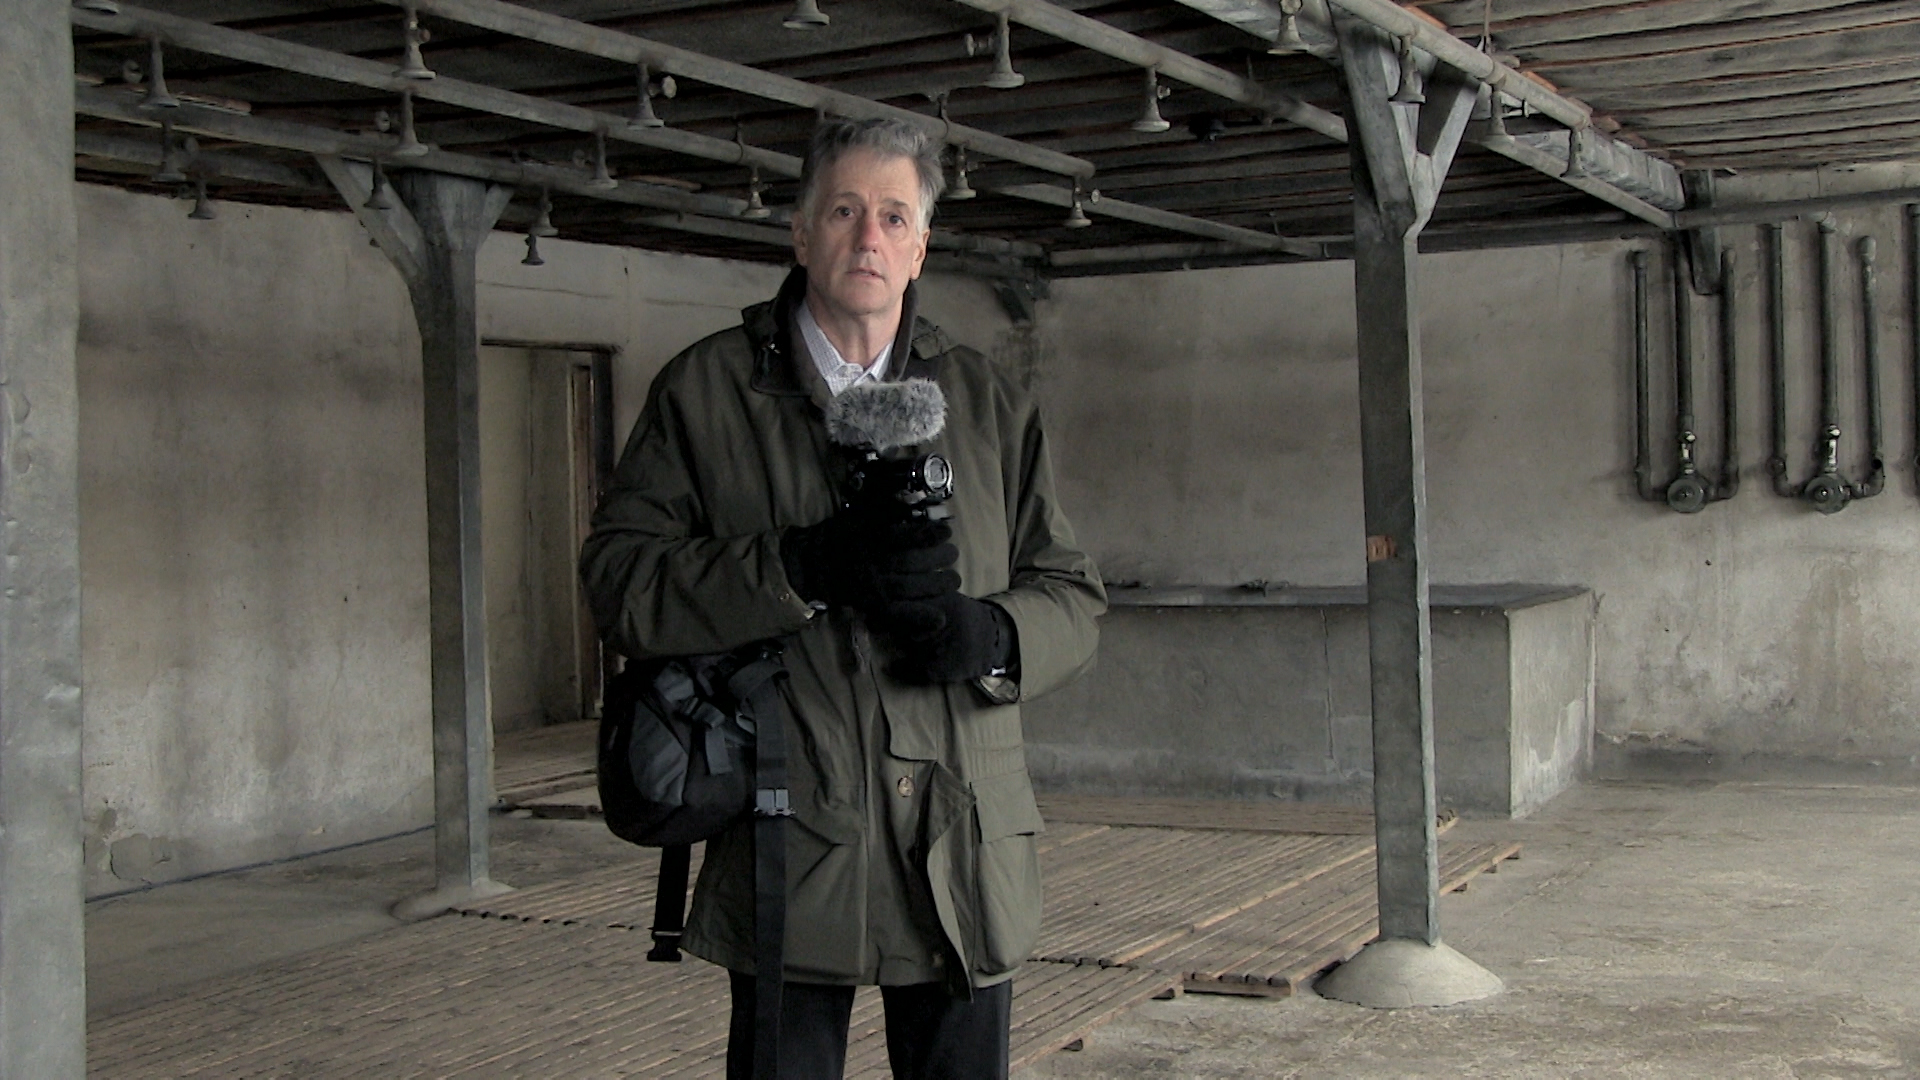 Paul Bachow in the showers outside the gas chambers in the Majdanek Concentration Camp in Poland.